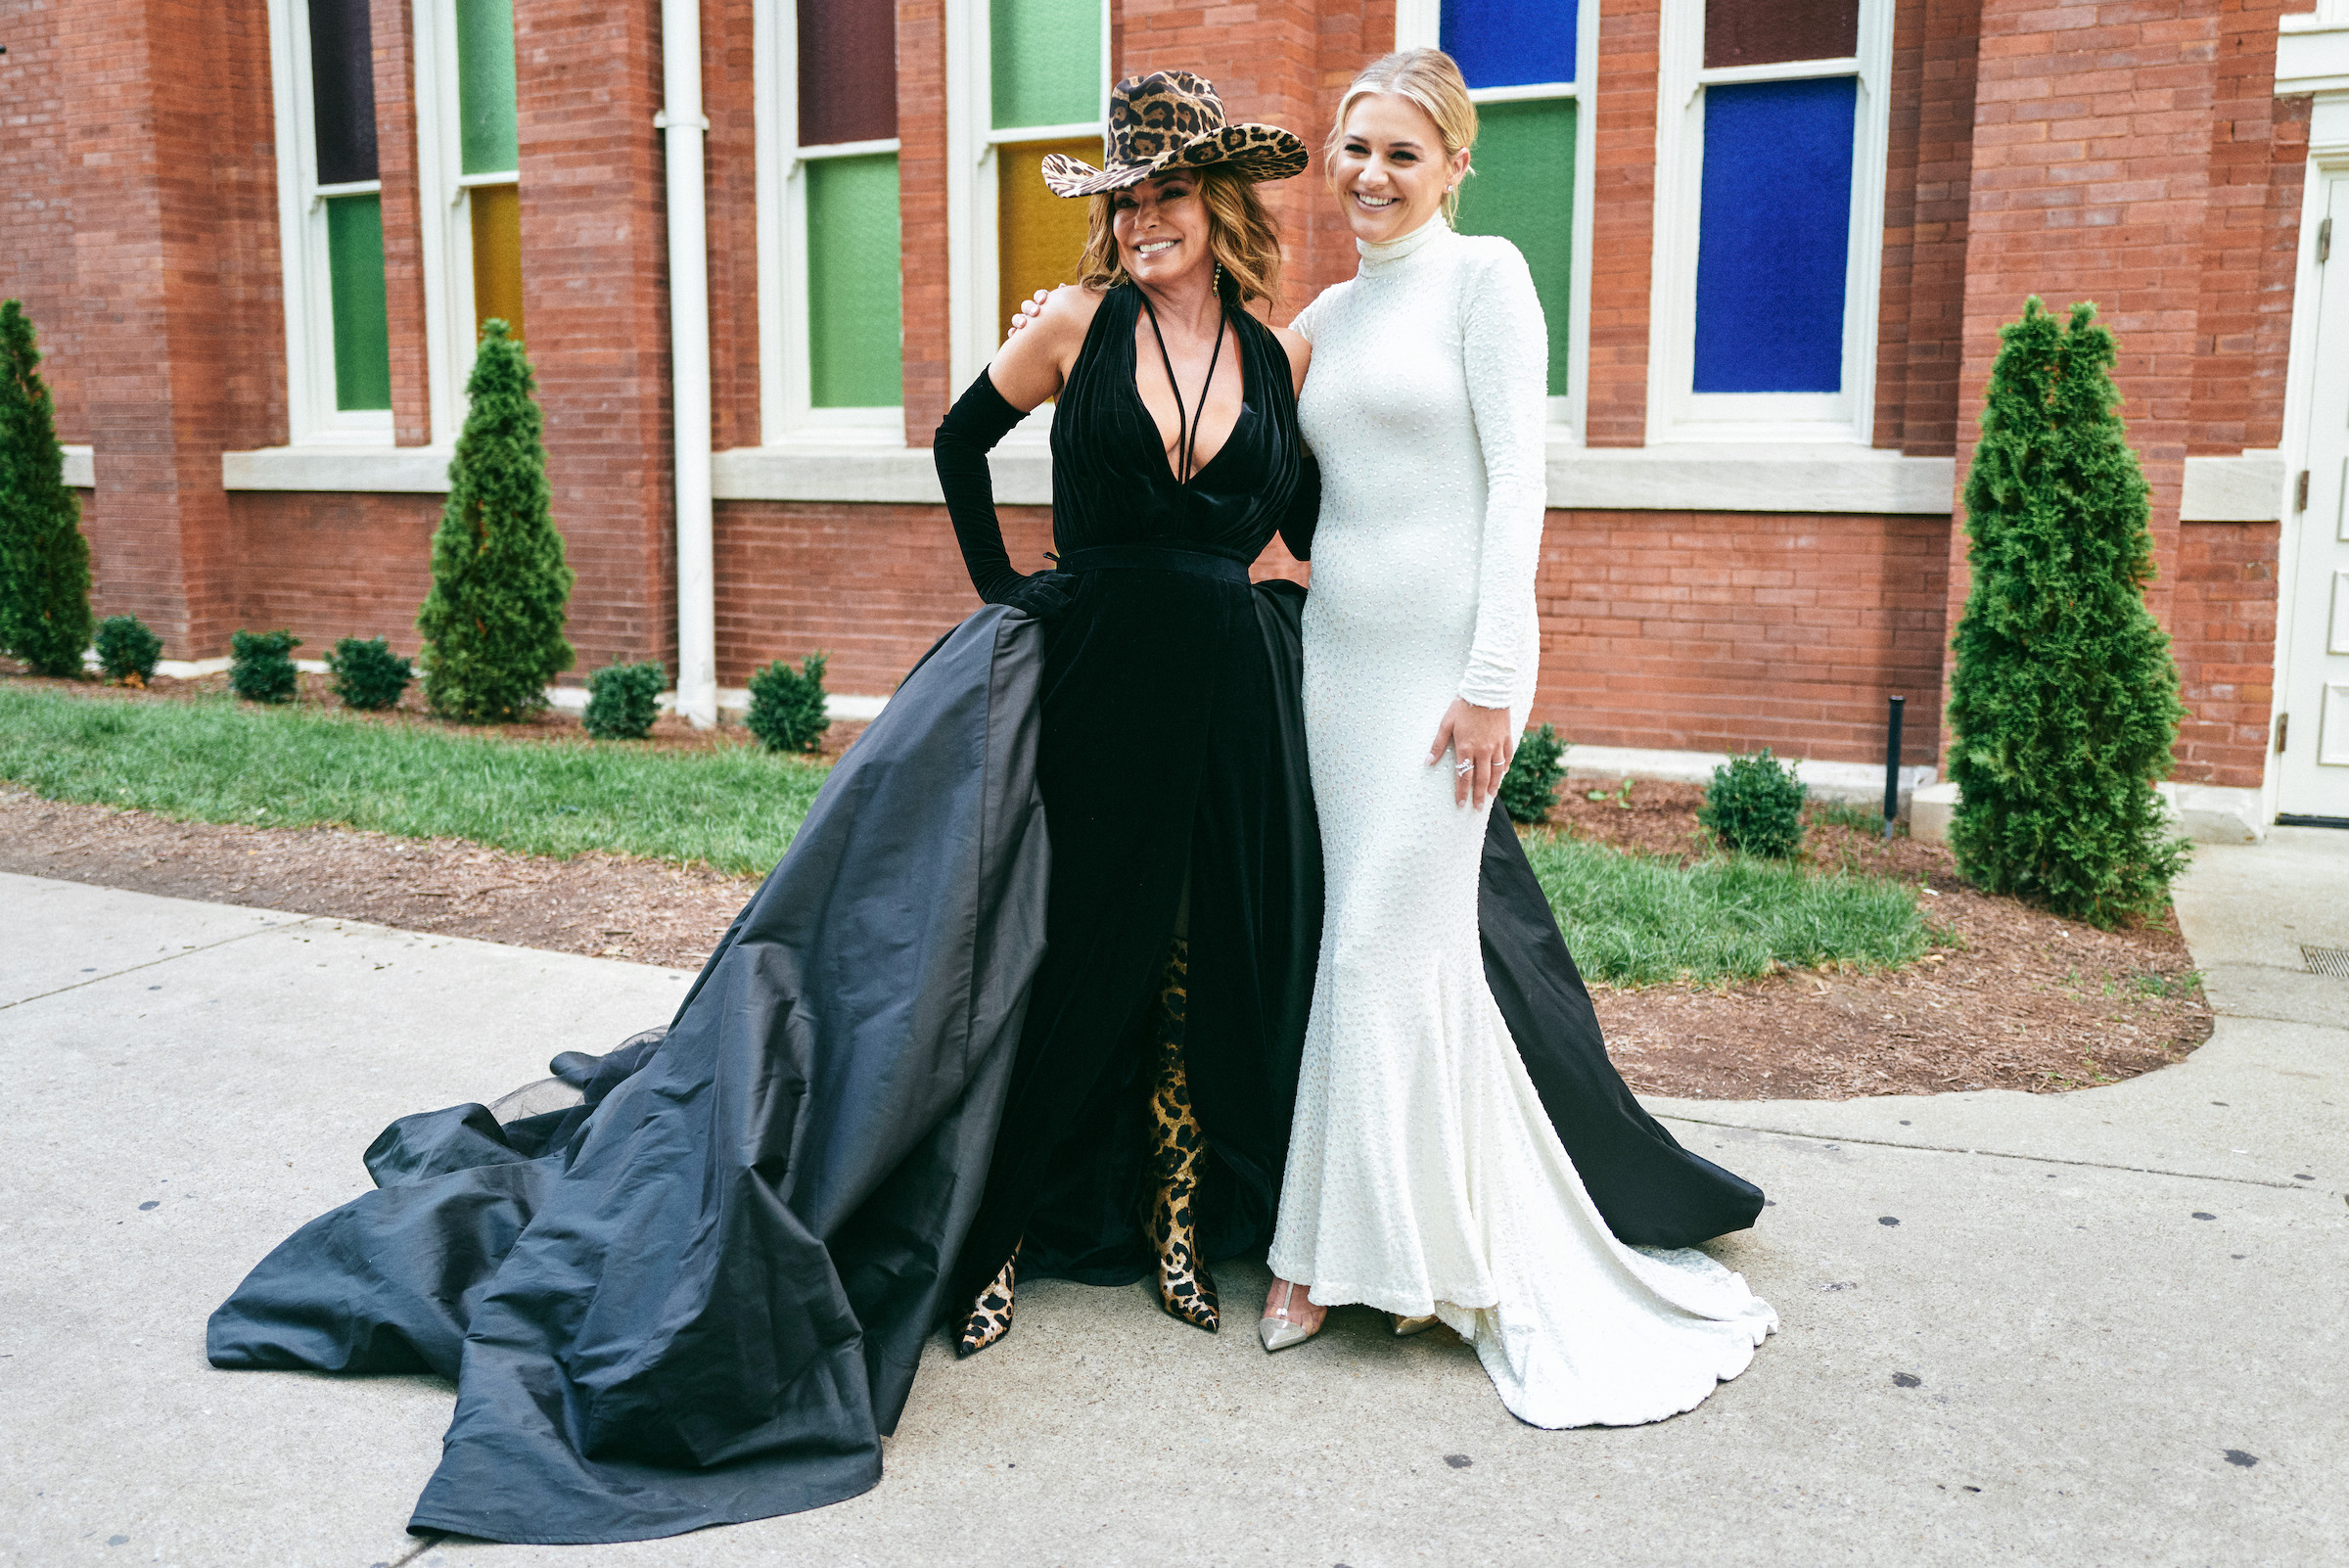 Honoree, Shania Twain and Kelsea Ballerini attend the 15th Annual Academy of Country Music Honors